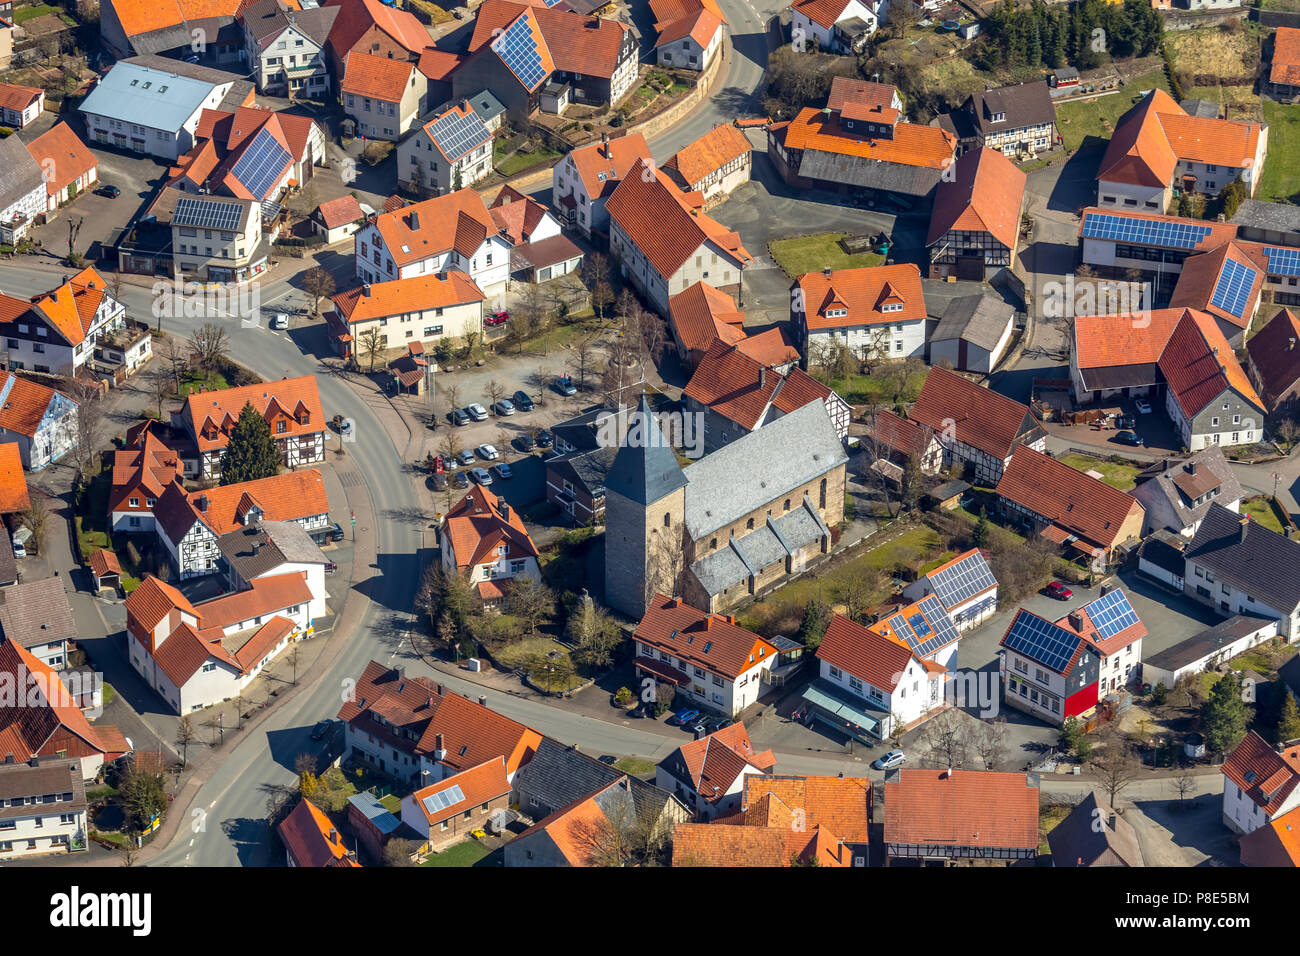 Aerial view, Town centre with fortified church Basilika St. Johannis, Adorf am Diemelsee, Hesse, North Hesse, Hesse, Germany Stock Photo